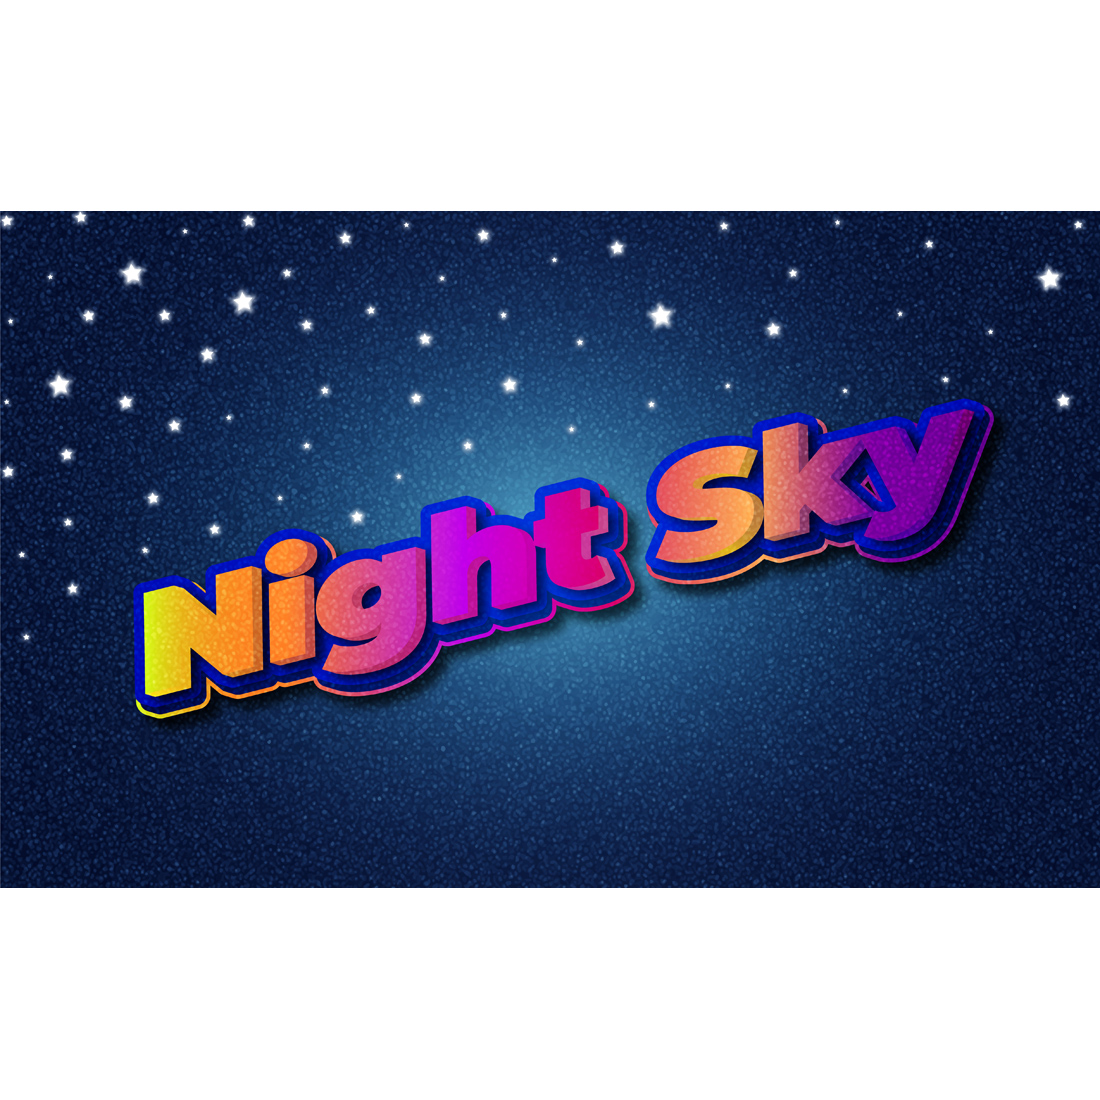 Night Sky text effect,3d text effect, text effect, 3d text, typography design, editable text effect preview image.